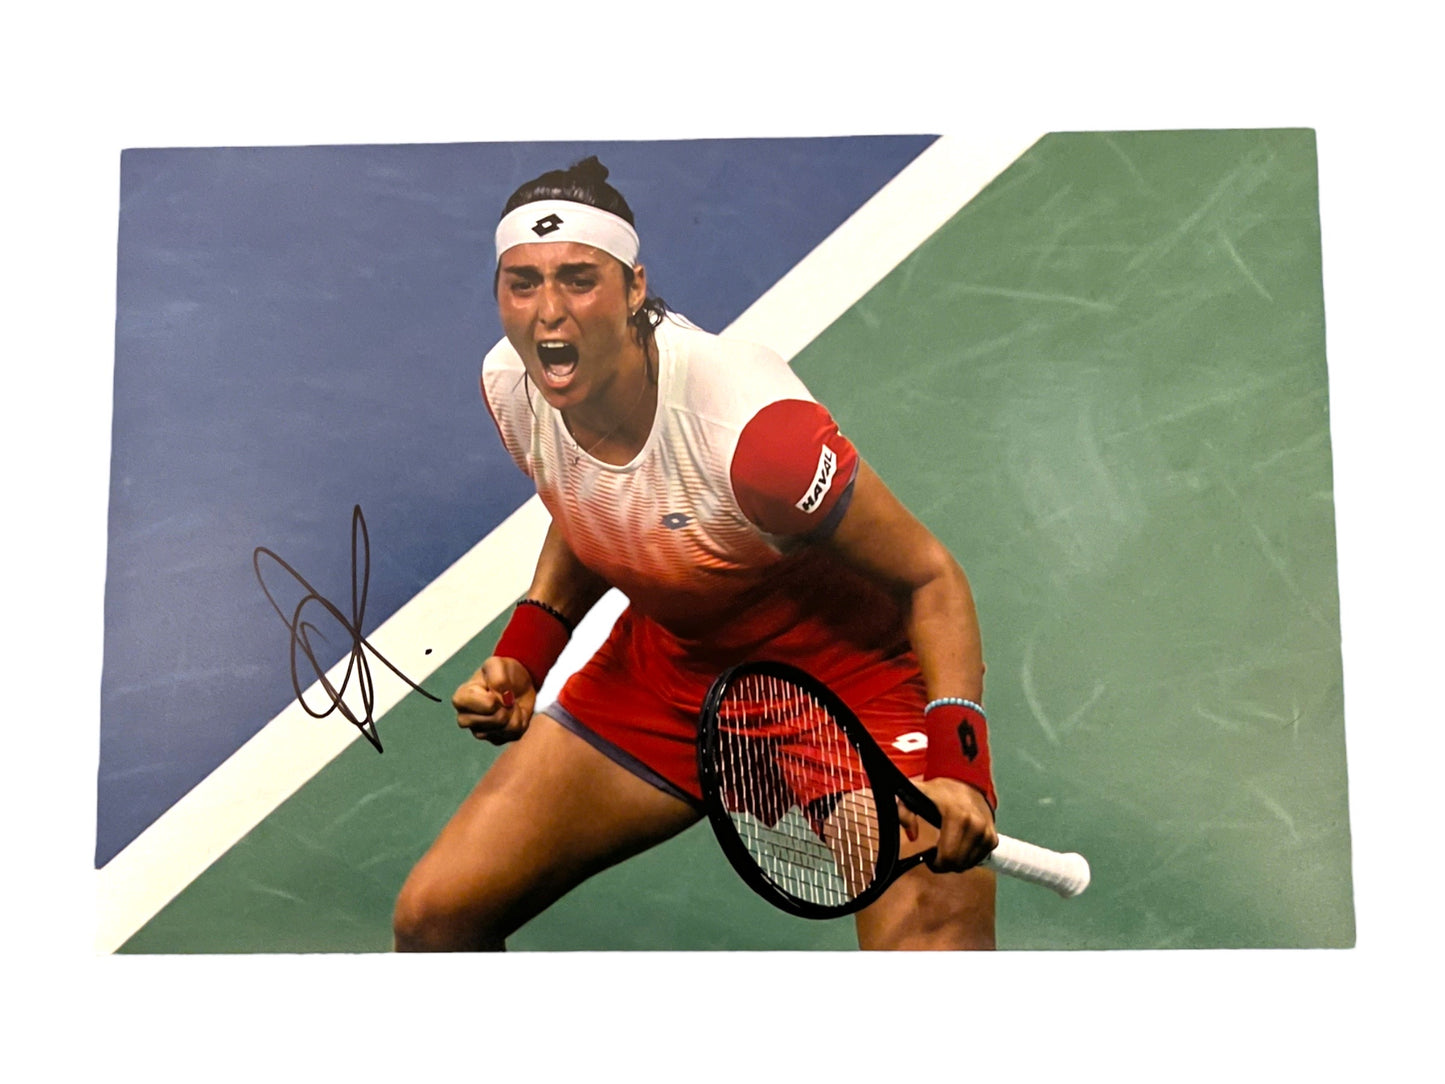 Ons Jabeur Signed 12x8 Photo